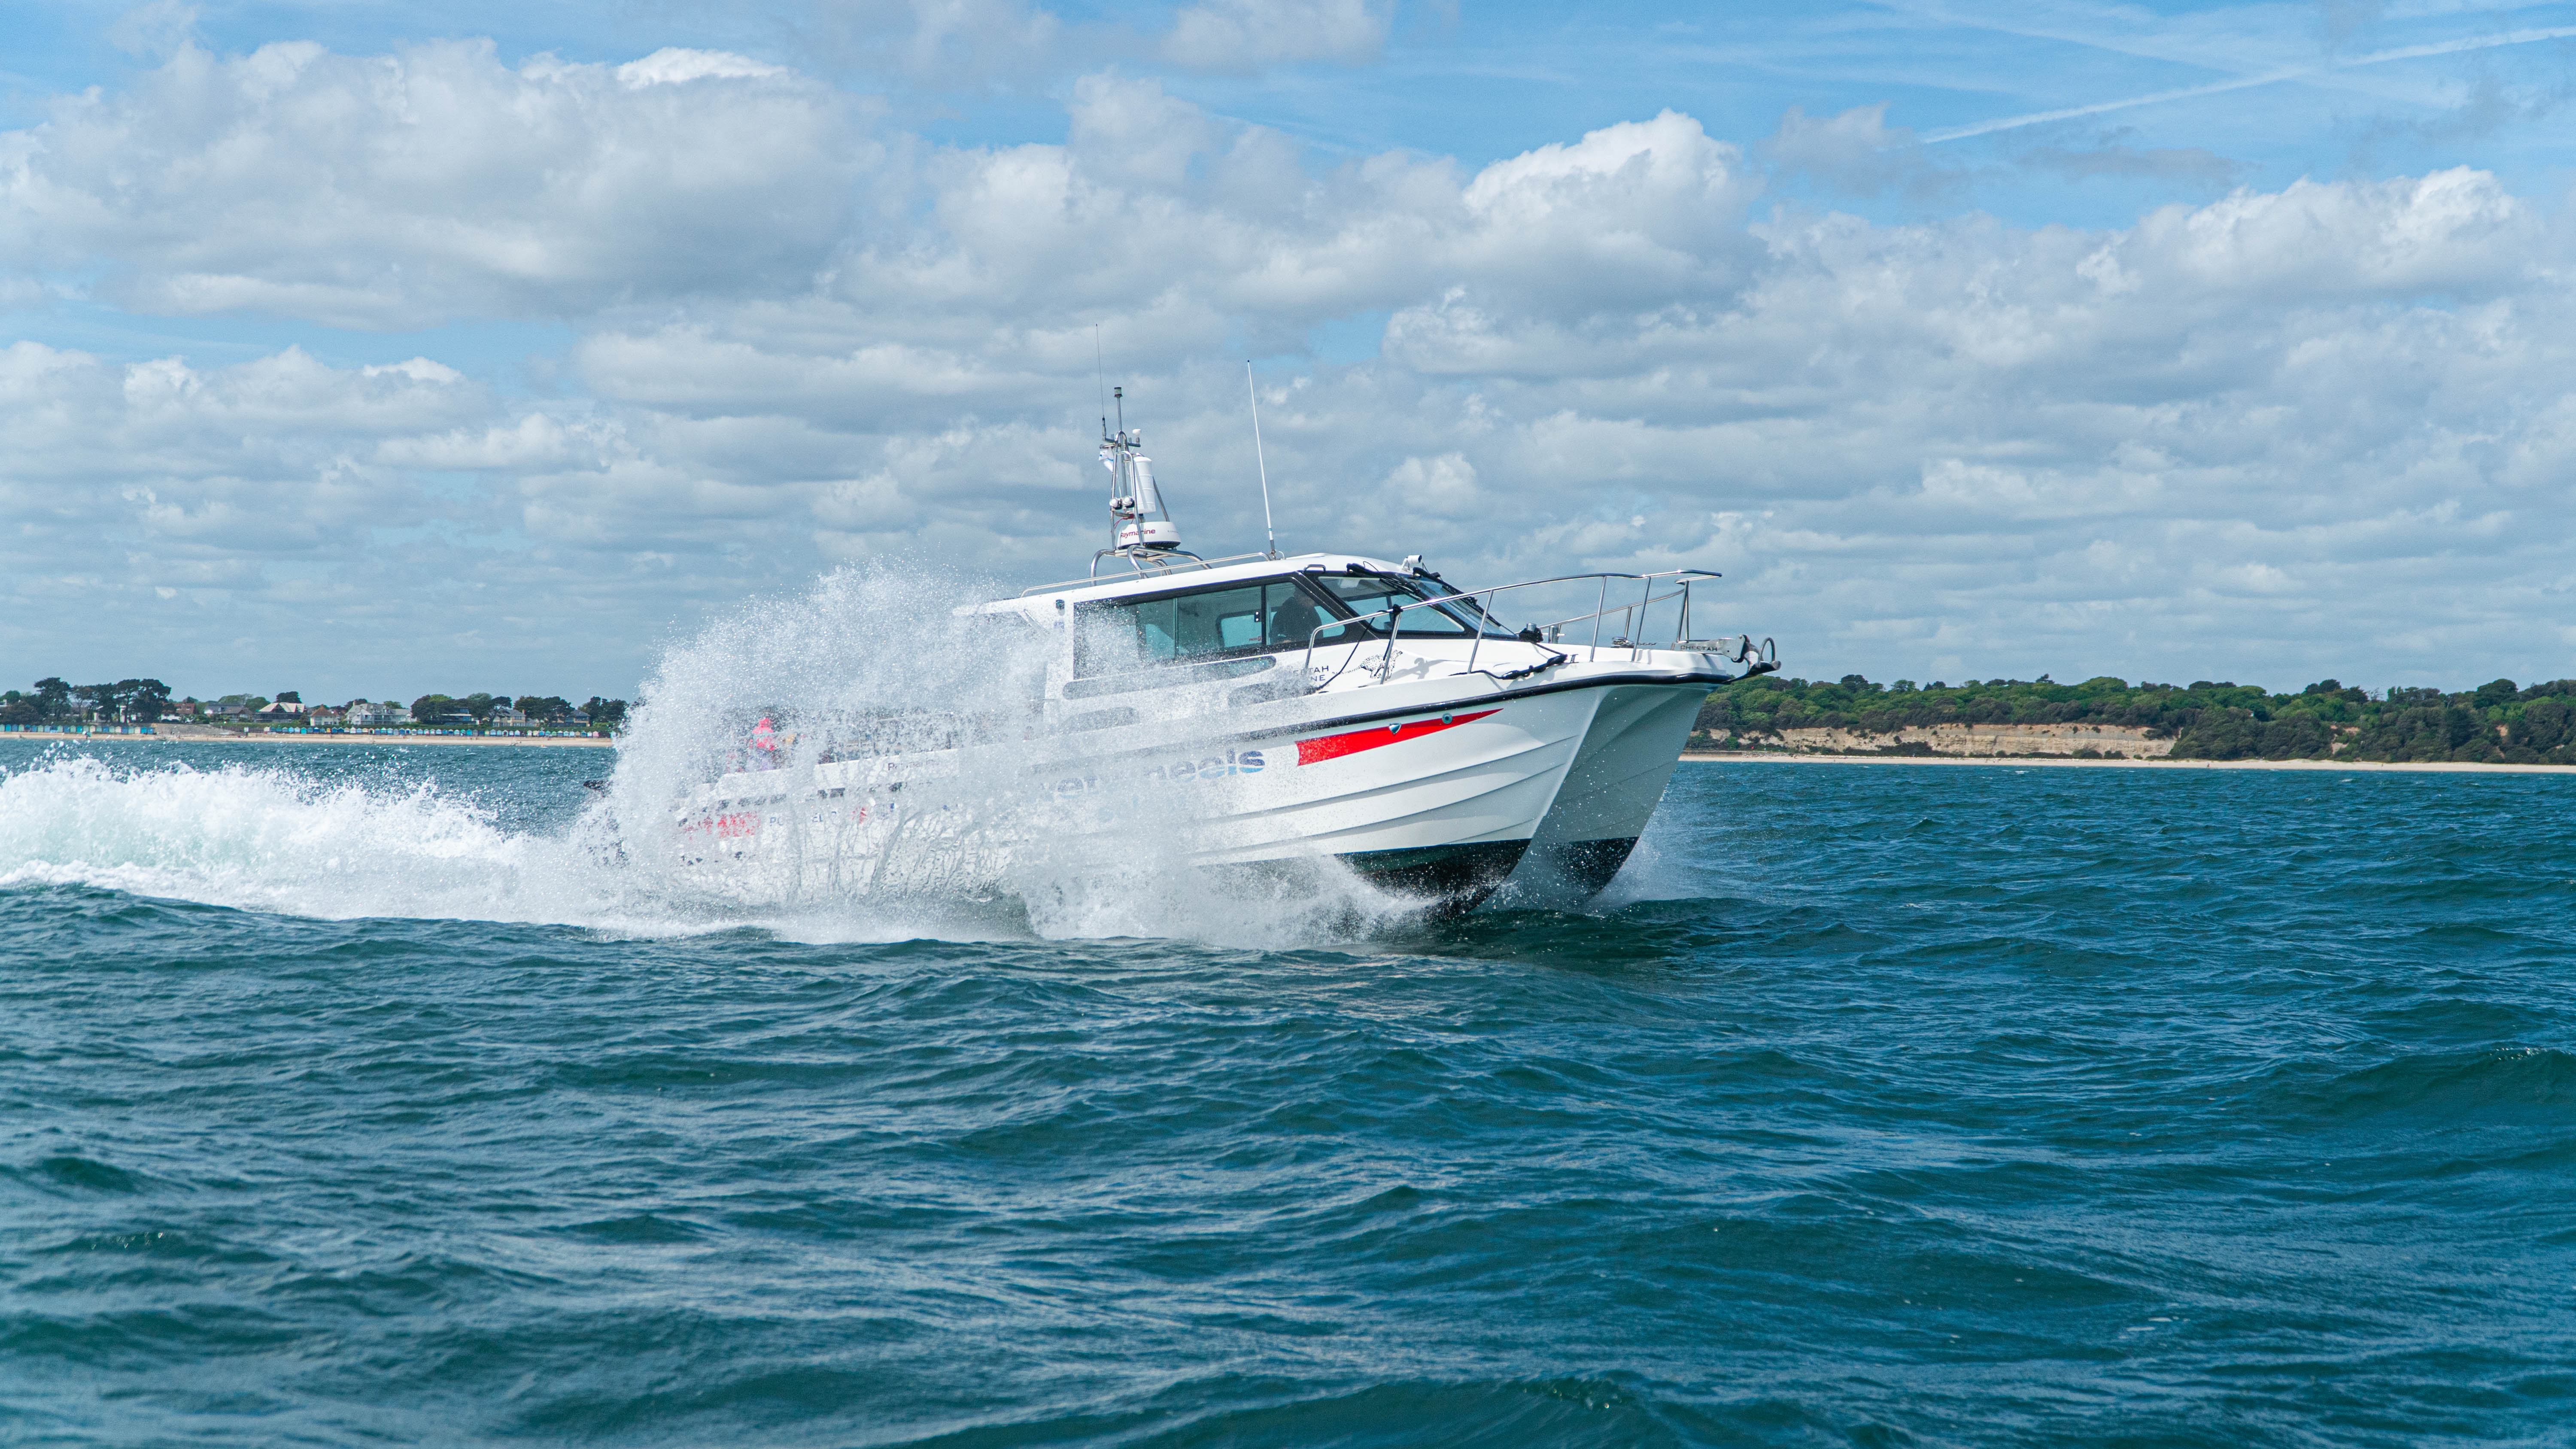 Maritime UK Solent makes waves with charity partner Wetwheels